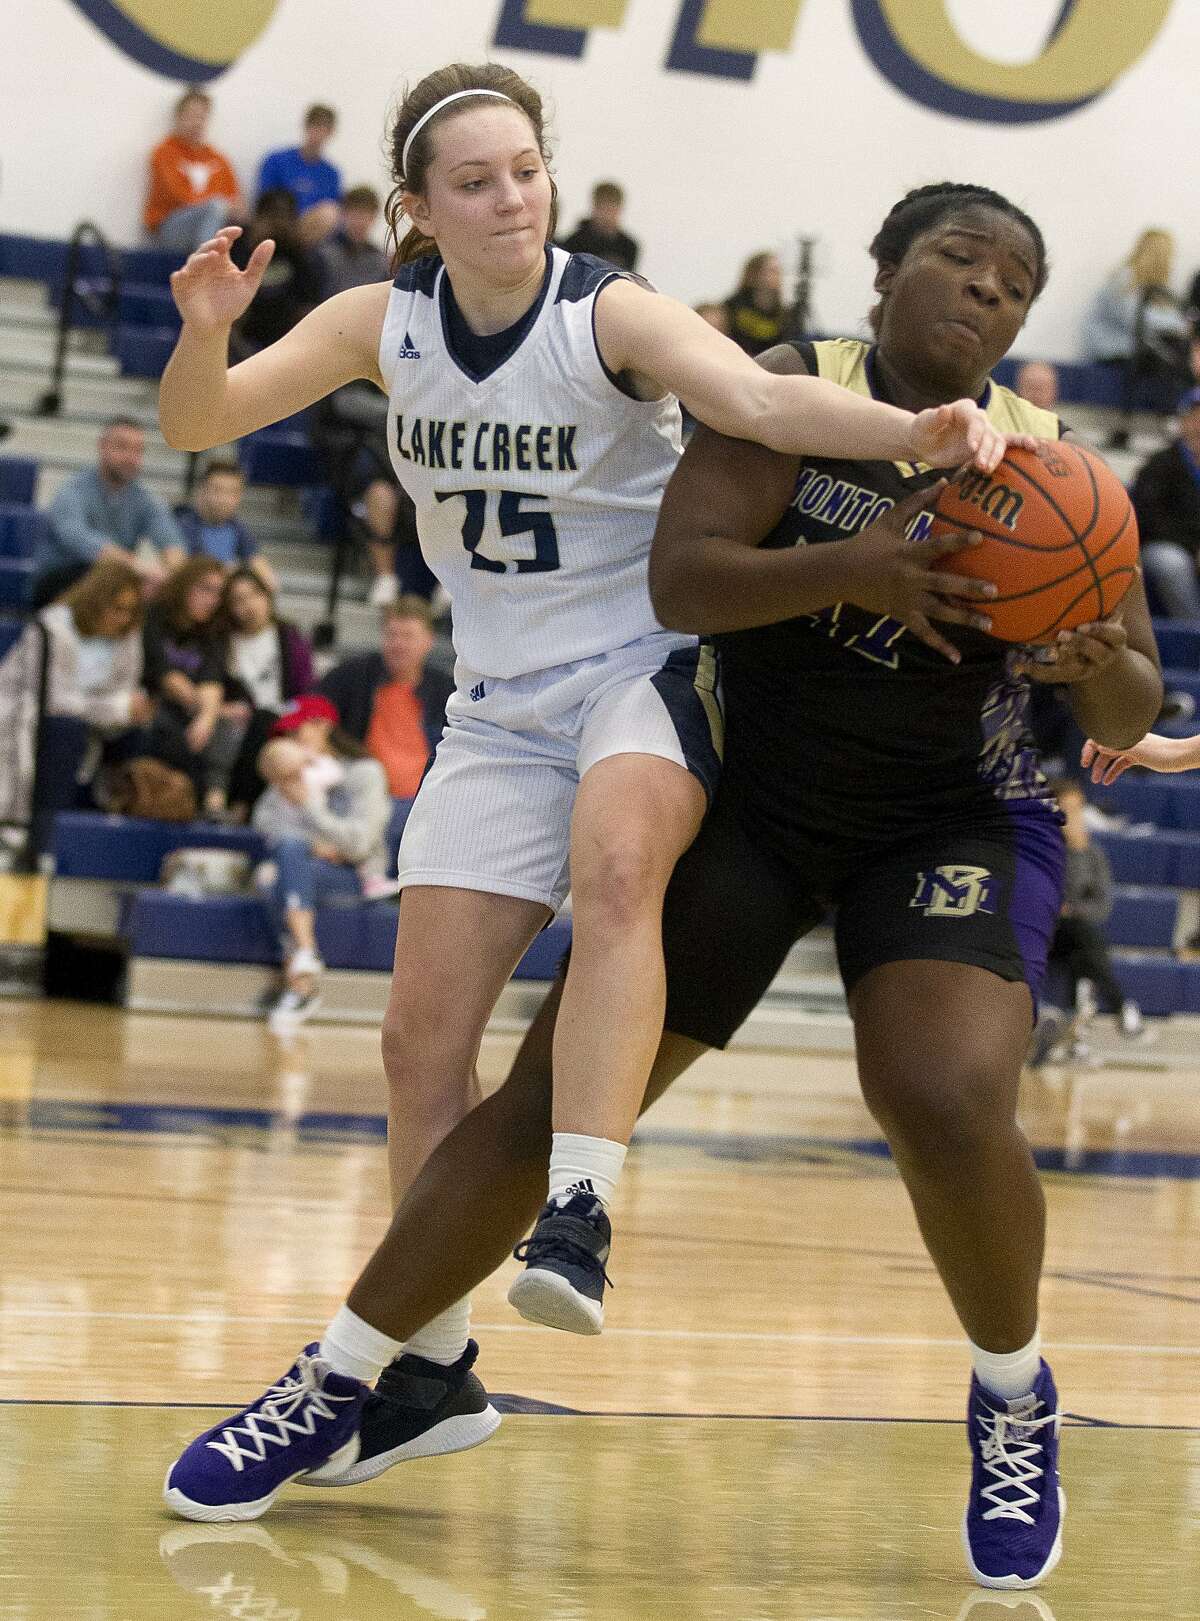 Lake Creek guard Natalie Murdock (25) reaches for a rebound against Montgomery center Deshayla Mallard (42) during the second quarter of a District 20-5A basketball game at Lake Creek High School, Friday, Jan. 4, 2018, in Montgomery.